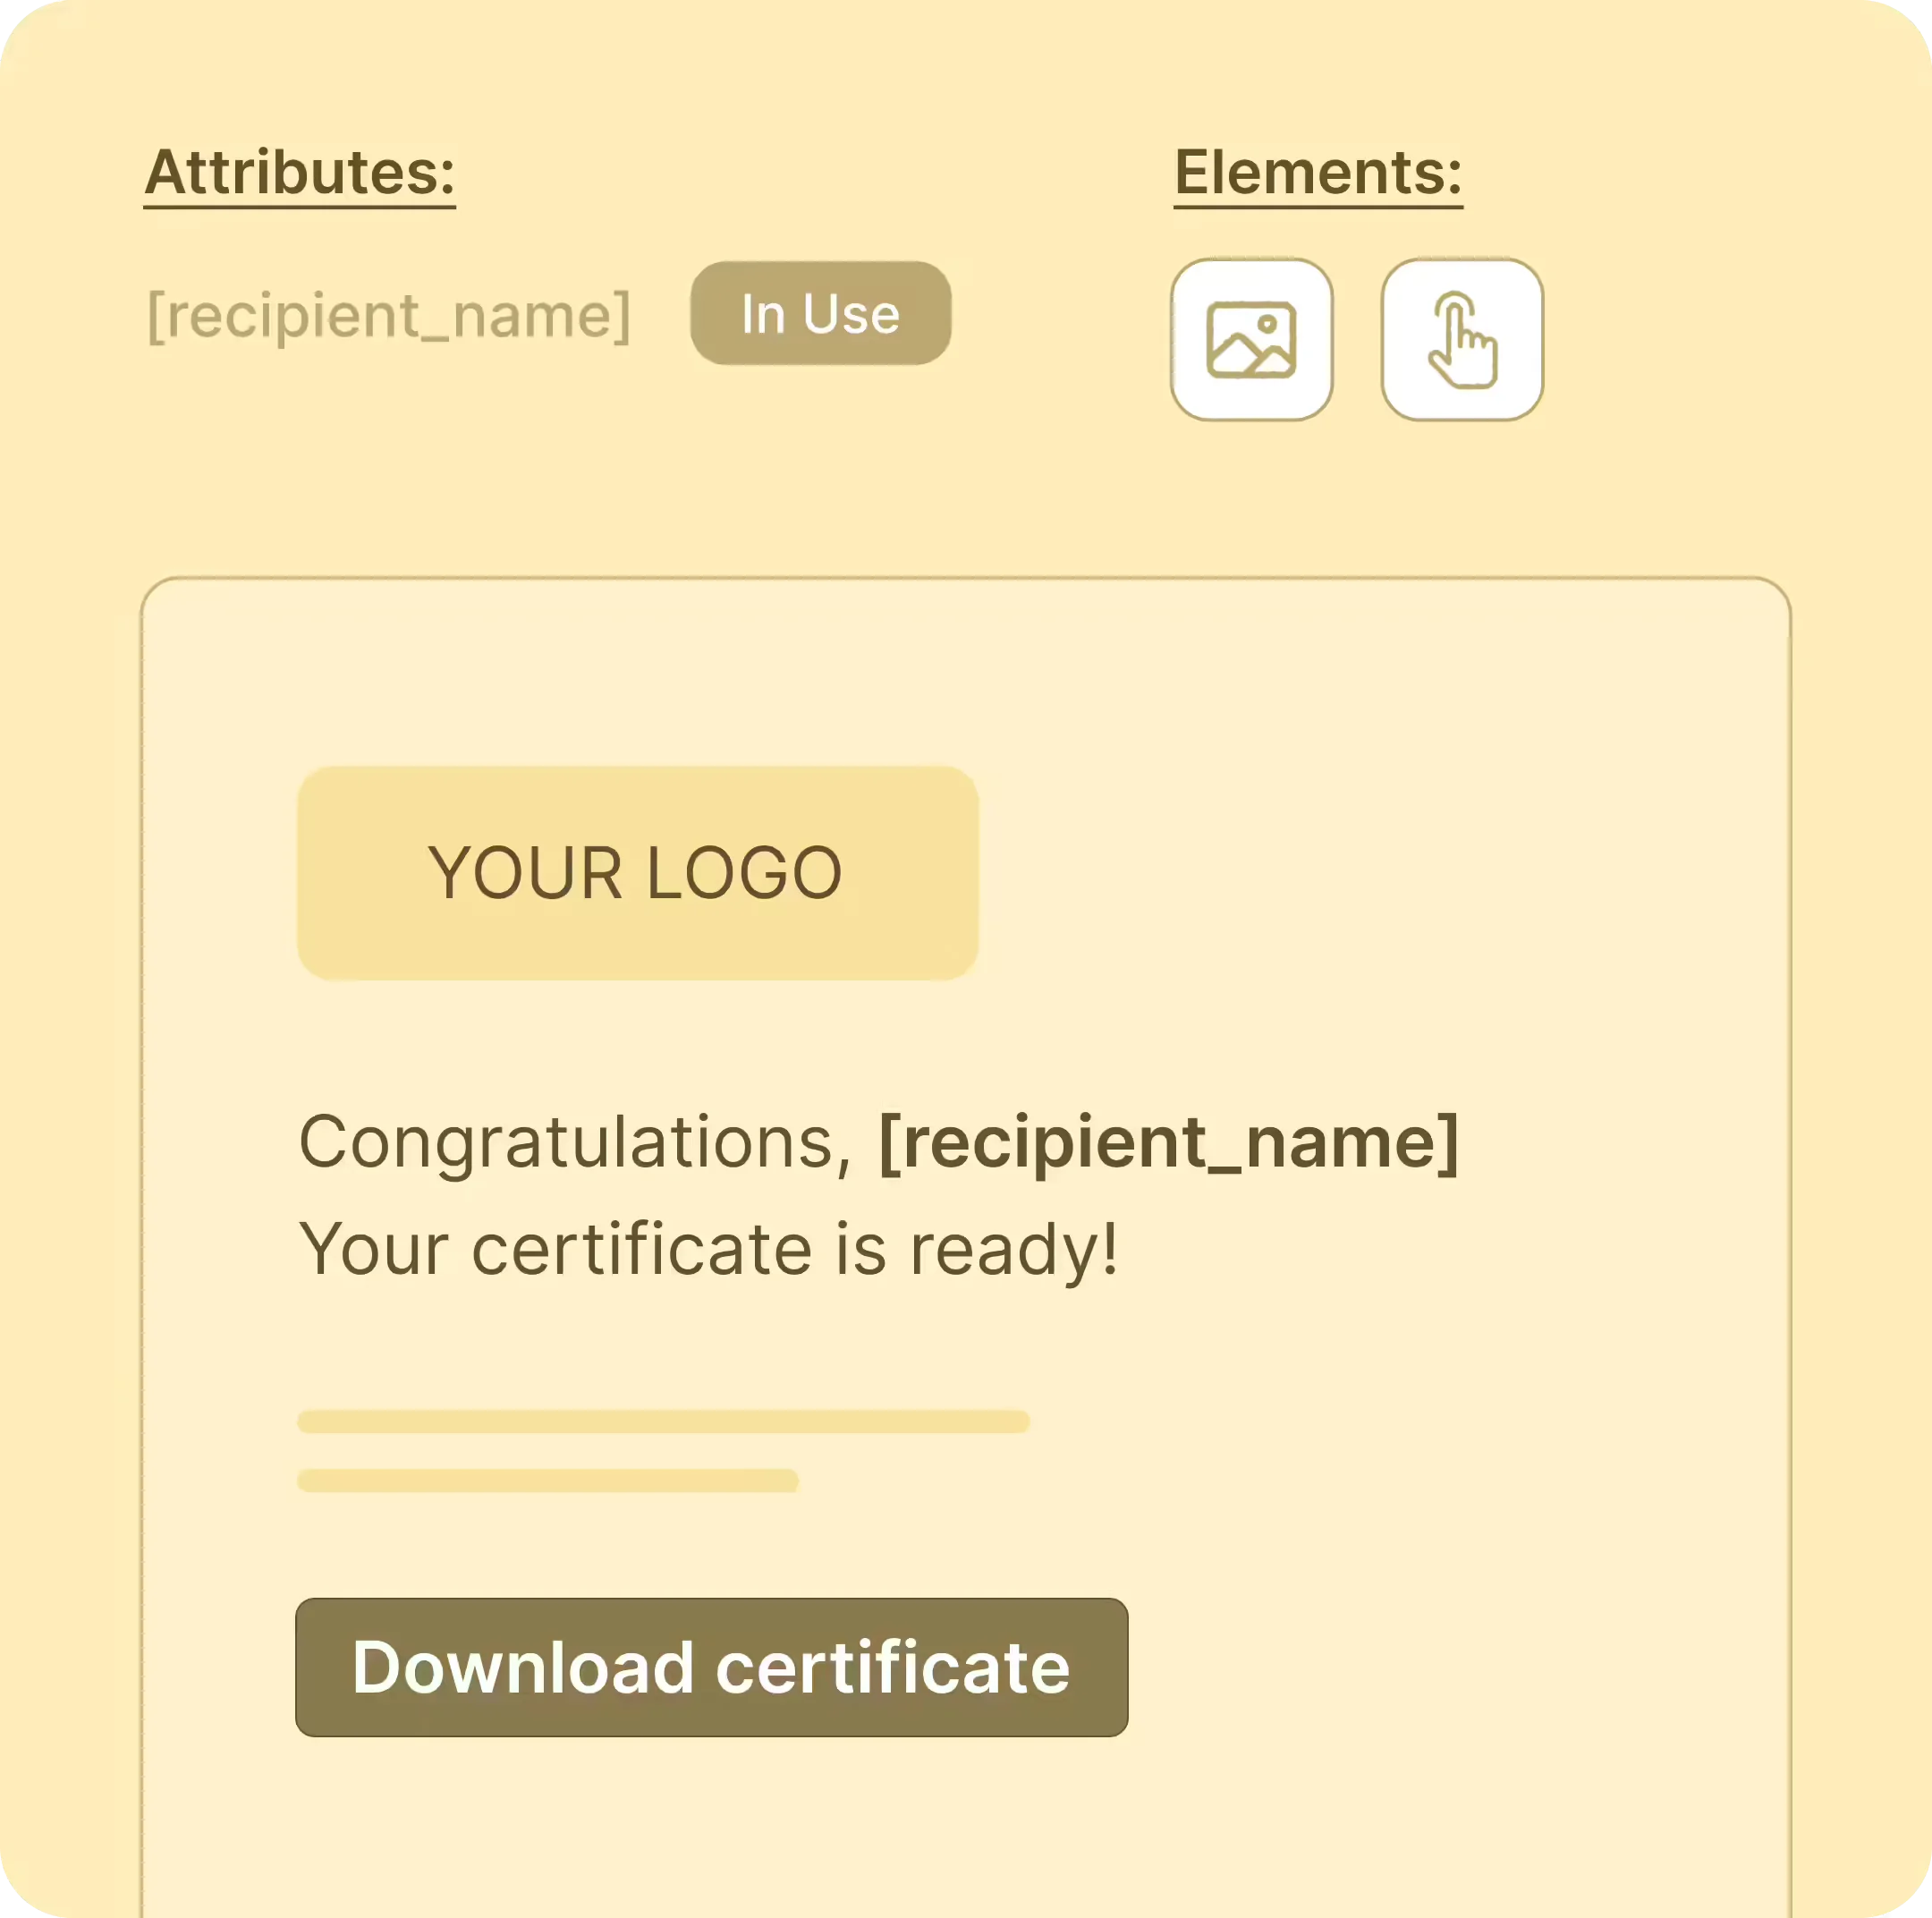 Quickly send a large number of certificates or badges via email